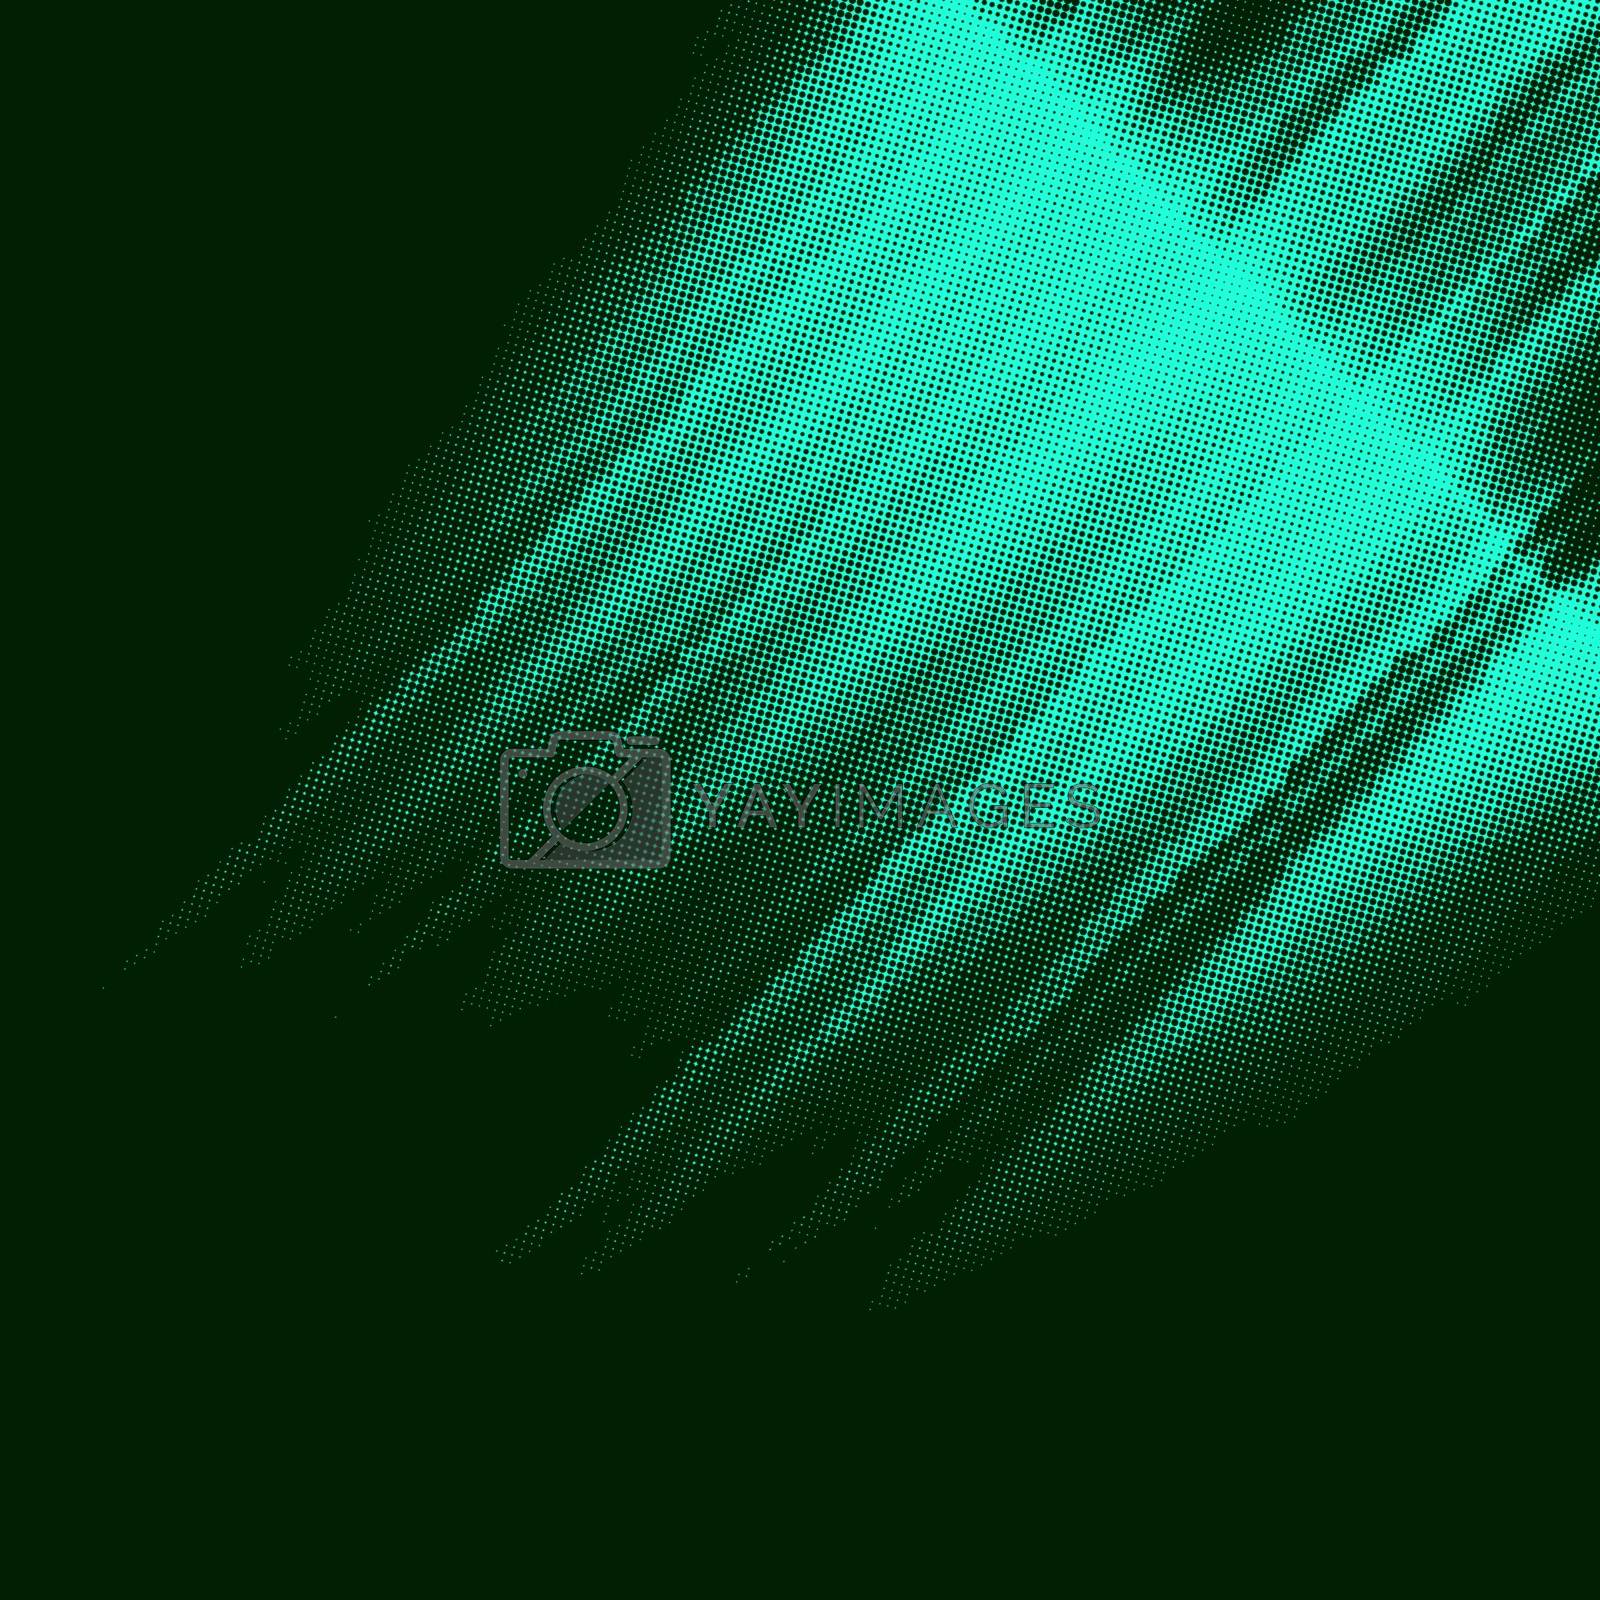 Royalty free image of Abstract green blue halftone. EPS 10 by Petrov_Vladimir